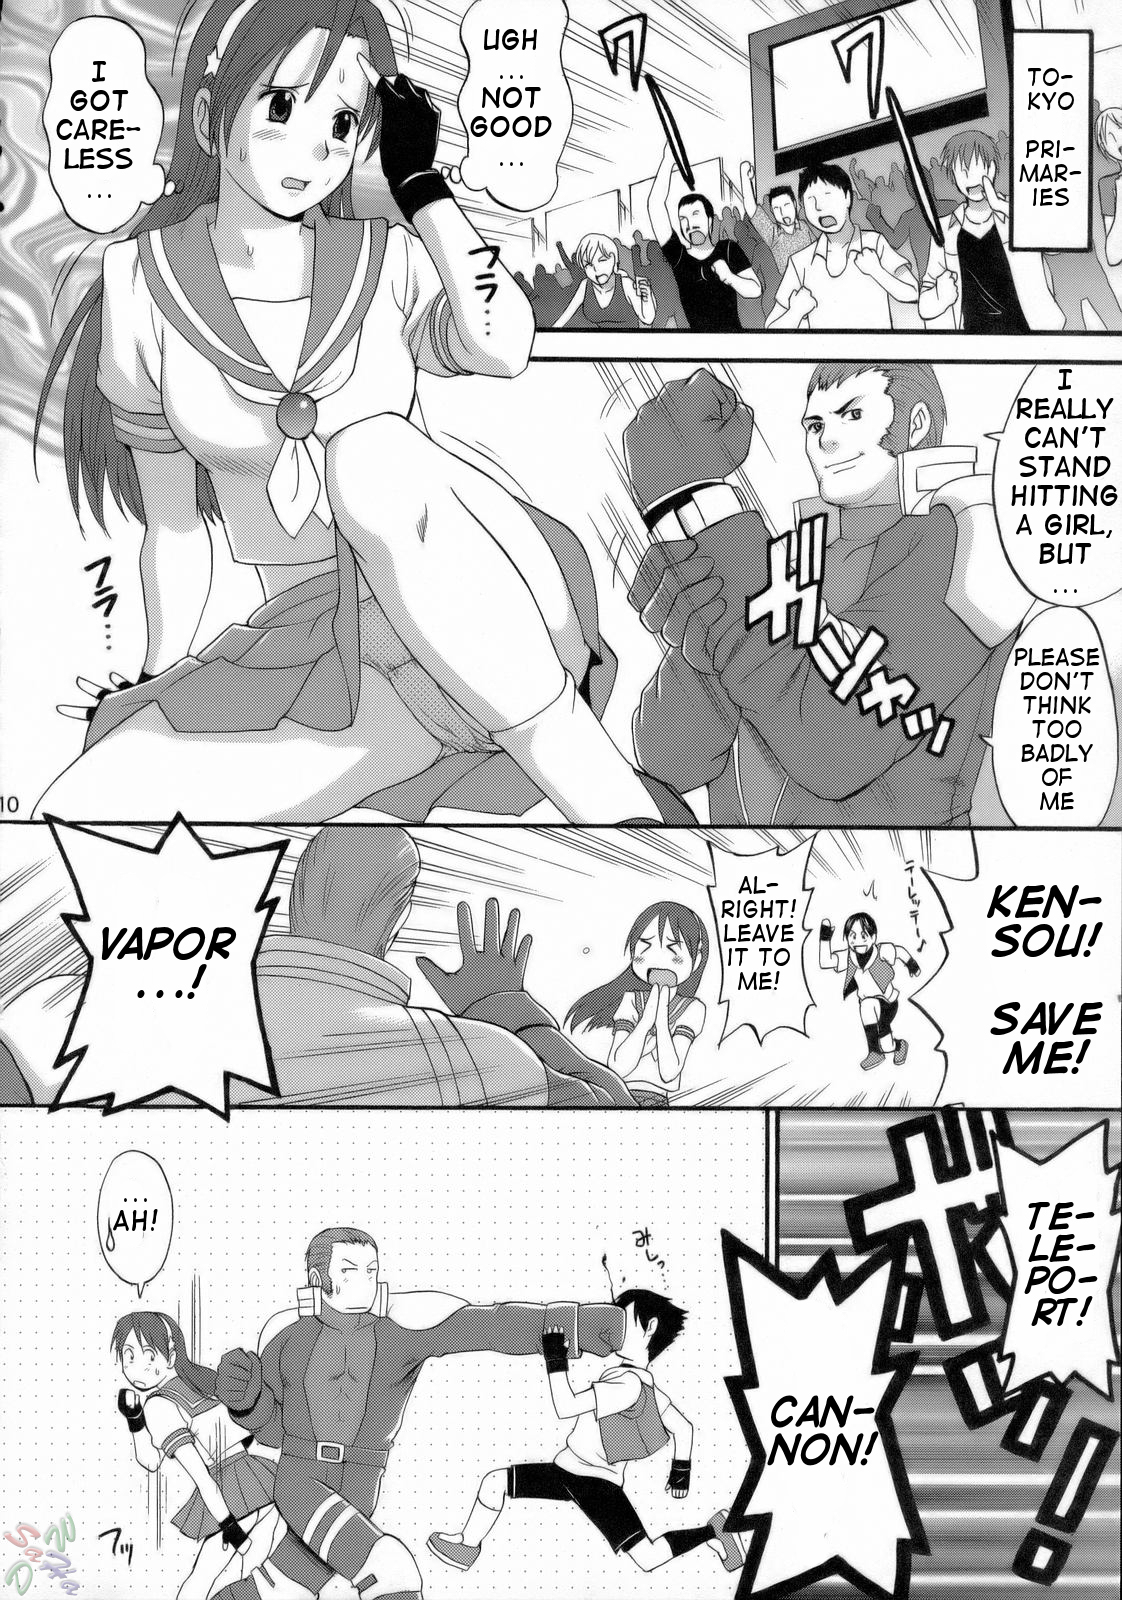 (C71) [Saigado] THE ATHENA & FRIENDS 2006 (King of Fighters) [English] [SaHa] page 9 full